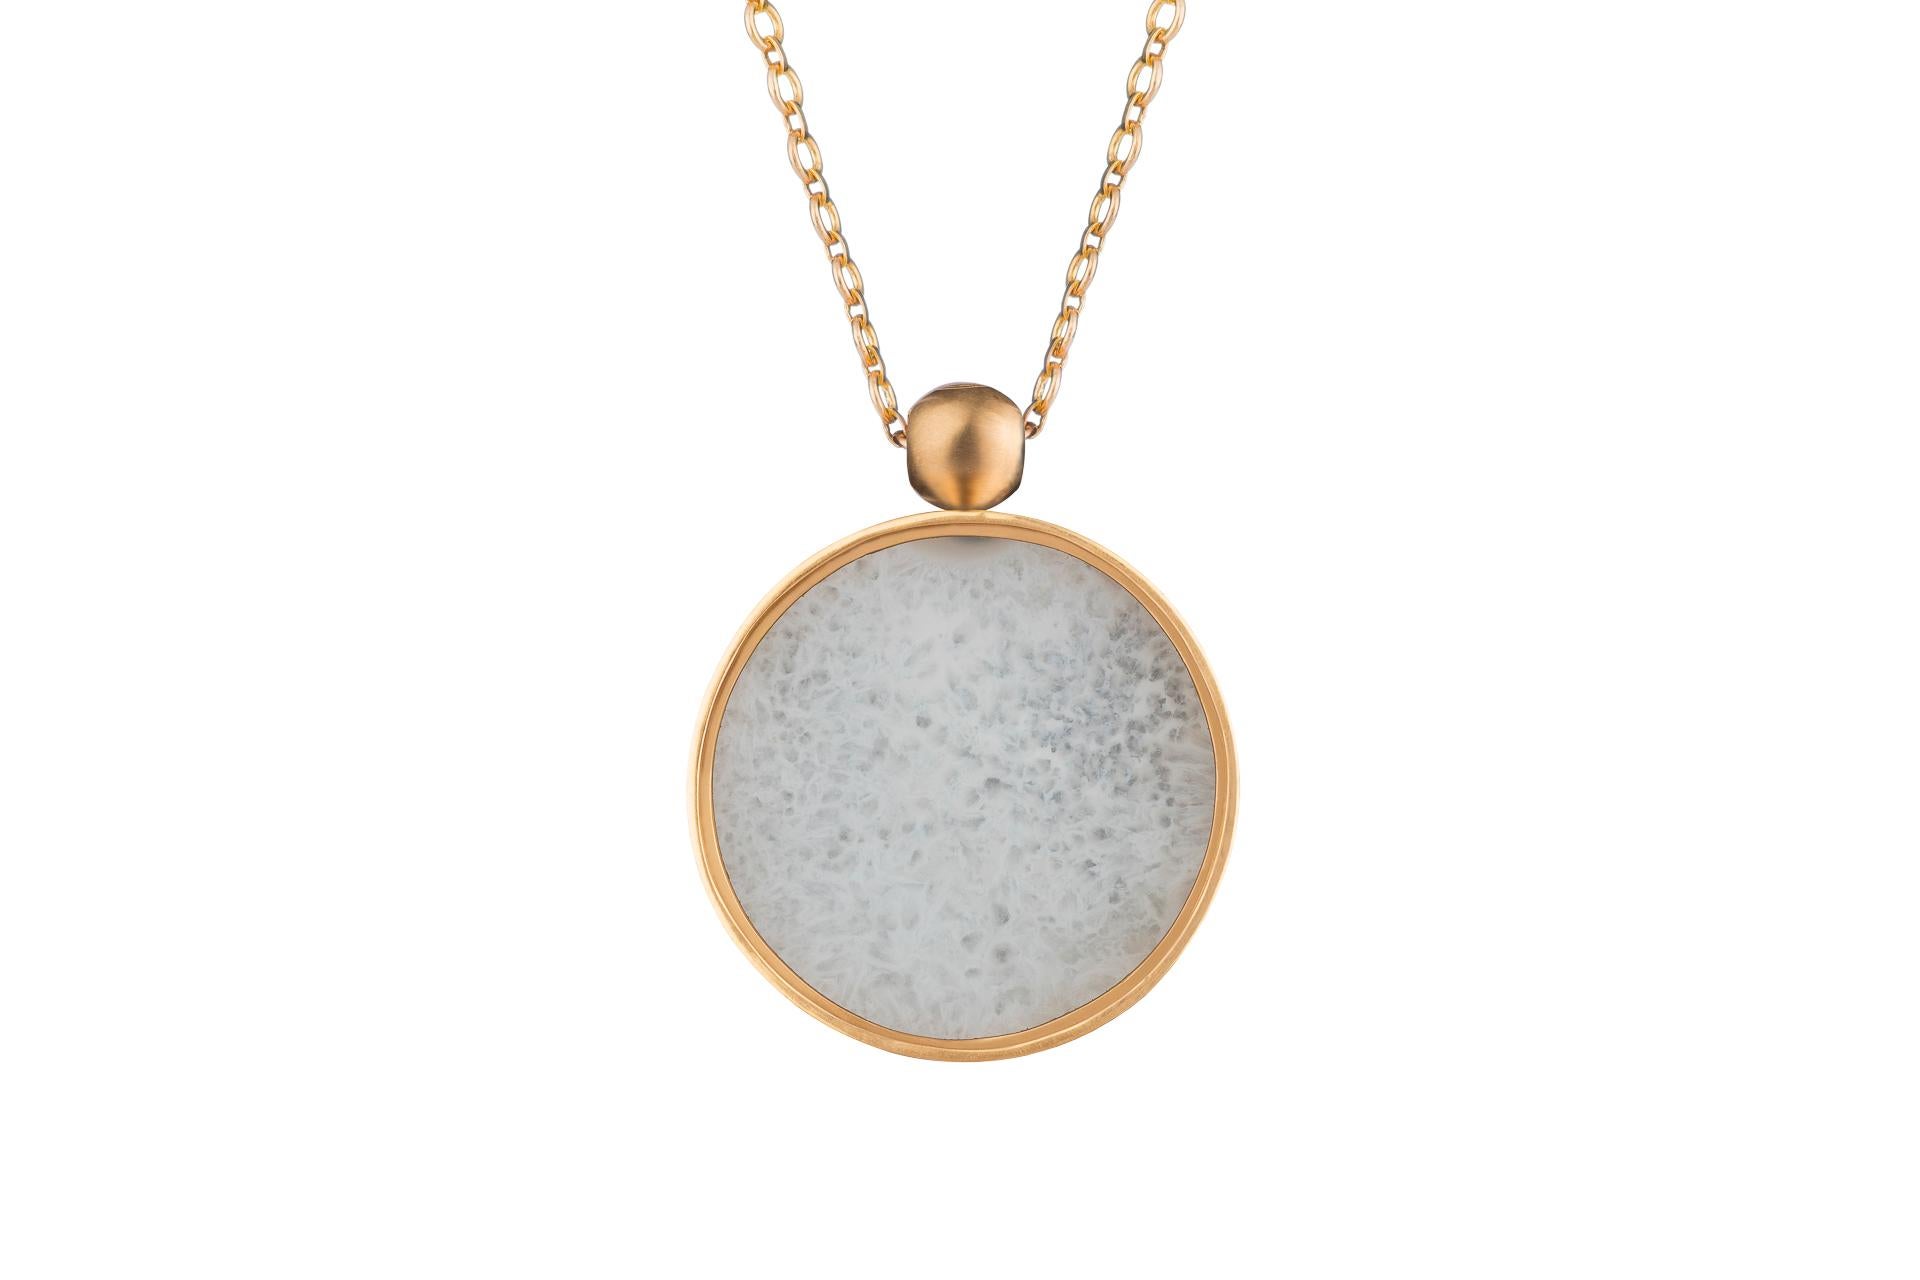 BABY SLICE OF THE MOON
White agate set in 18kt gold pendant, this pricing is without the chain.  There is also a black rhodium plated silver chain option.

If this item is out of stock. Everything is made to order and can take 4-6 weeks.

OUROBOROS